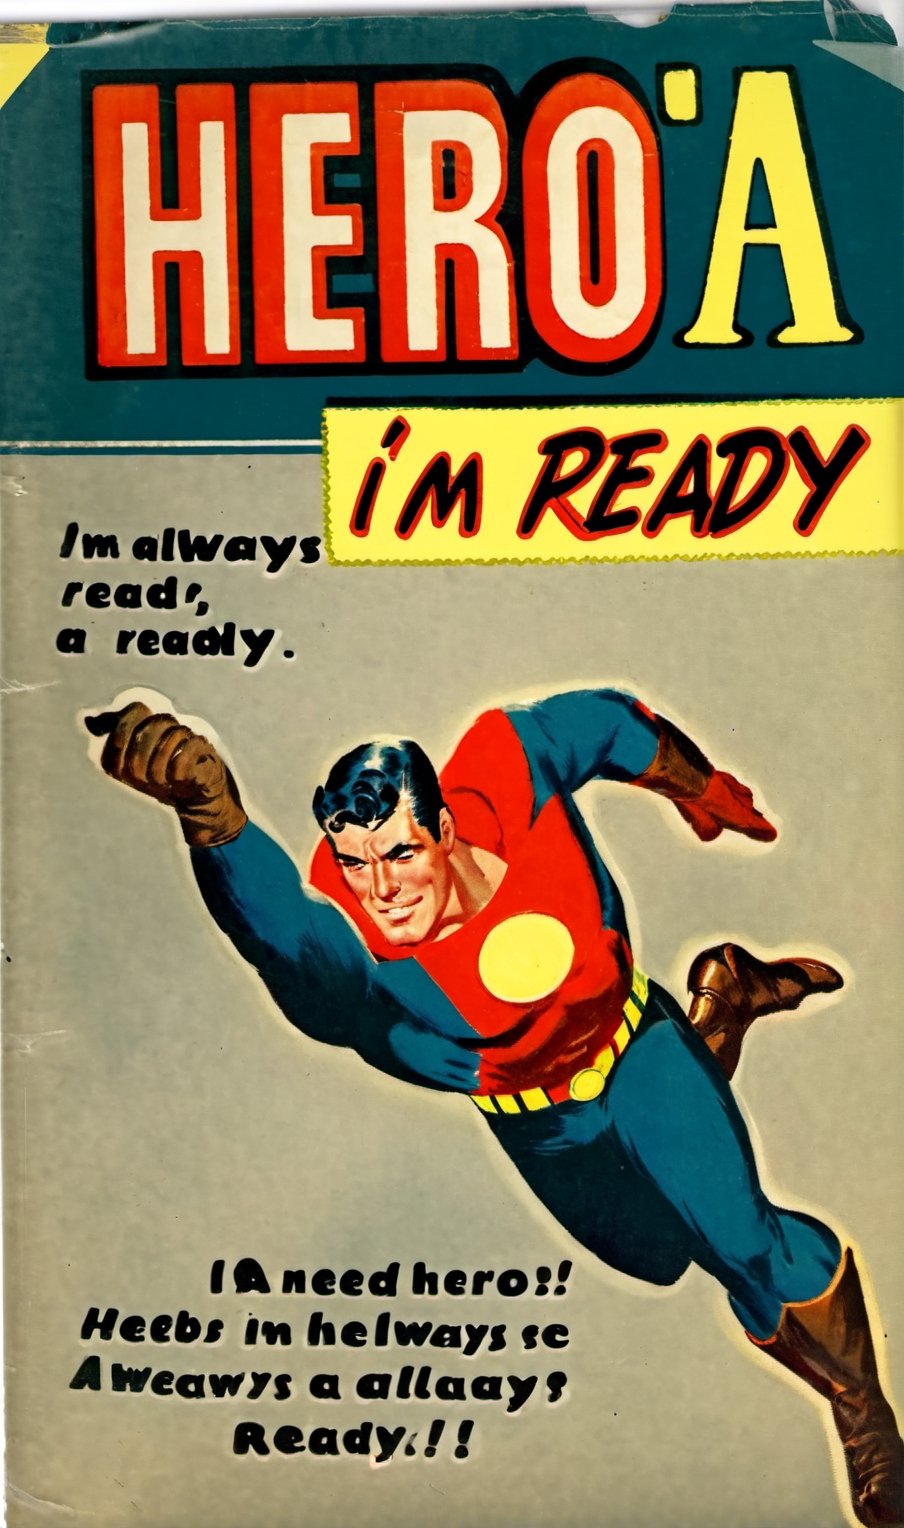 i need a hero!,
he says "I'm always ready!",
VintageMagStyle